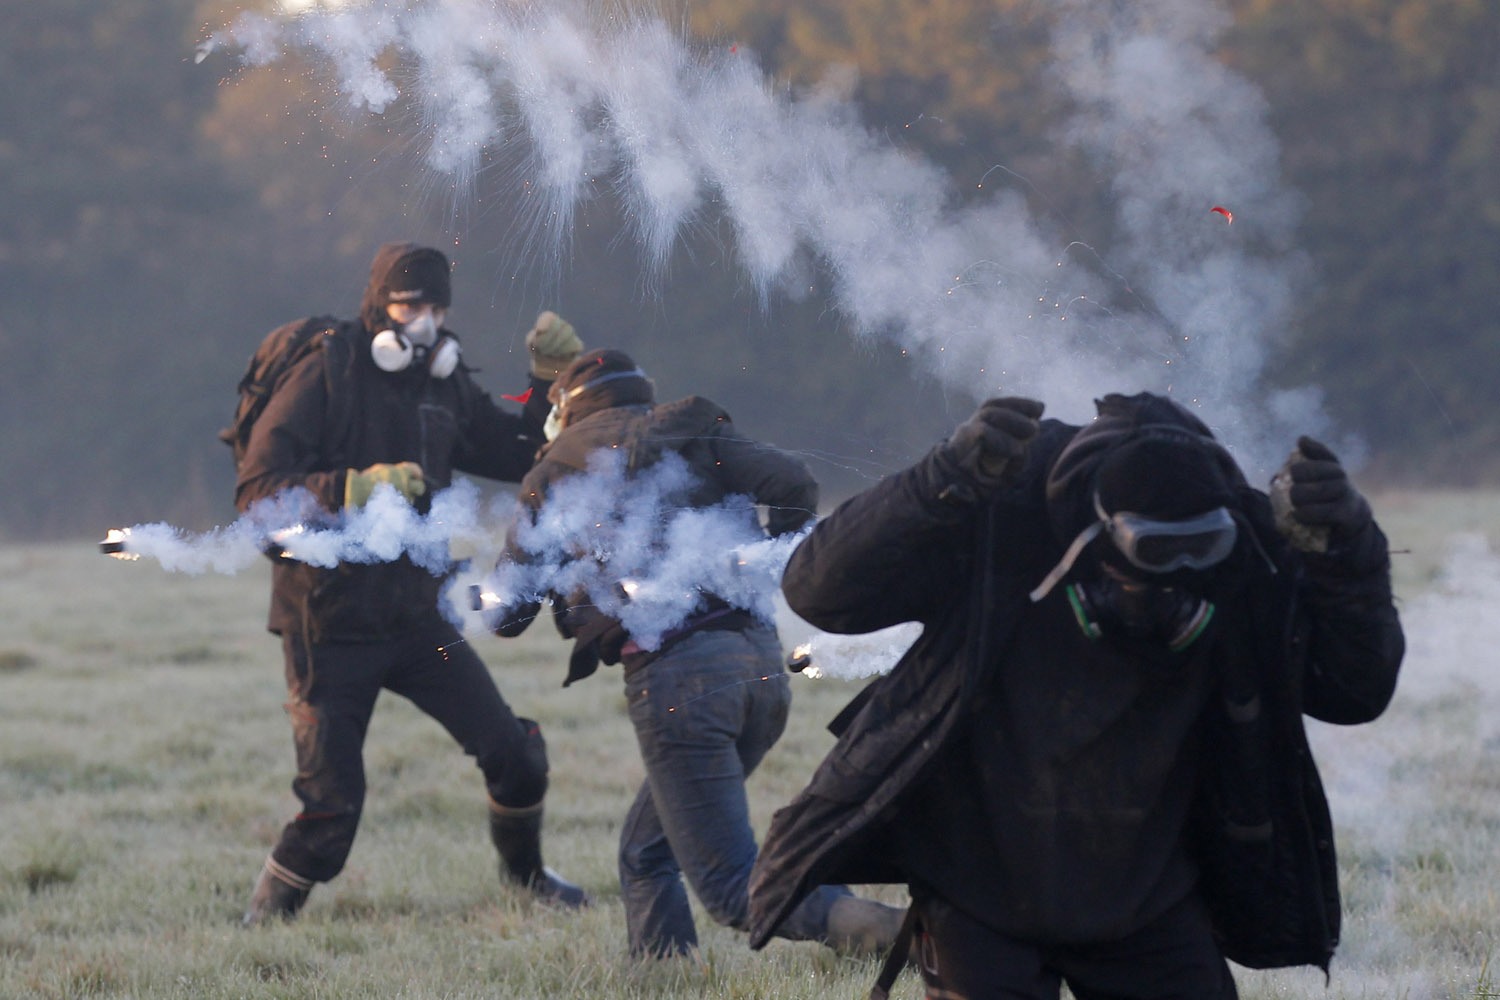 Image: Oct. 30, 2012. Anti-airport protesters clash with French riot gendarmes amid a cloud of teargas during an evacuation operation on the land that will become the new airport in Notre-Dame-des-Landes, western France.